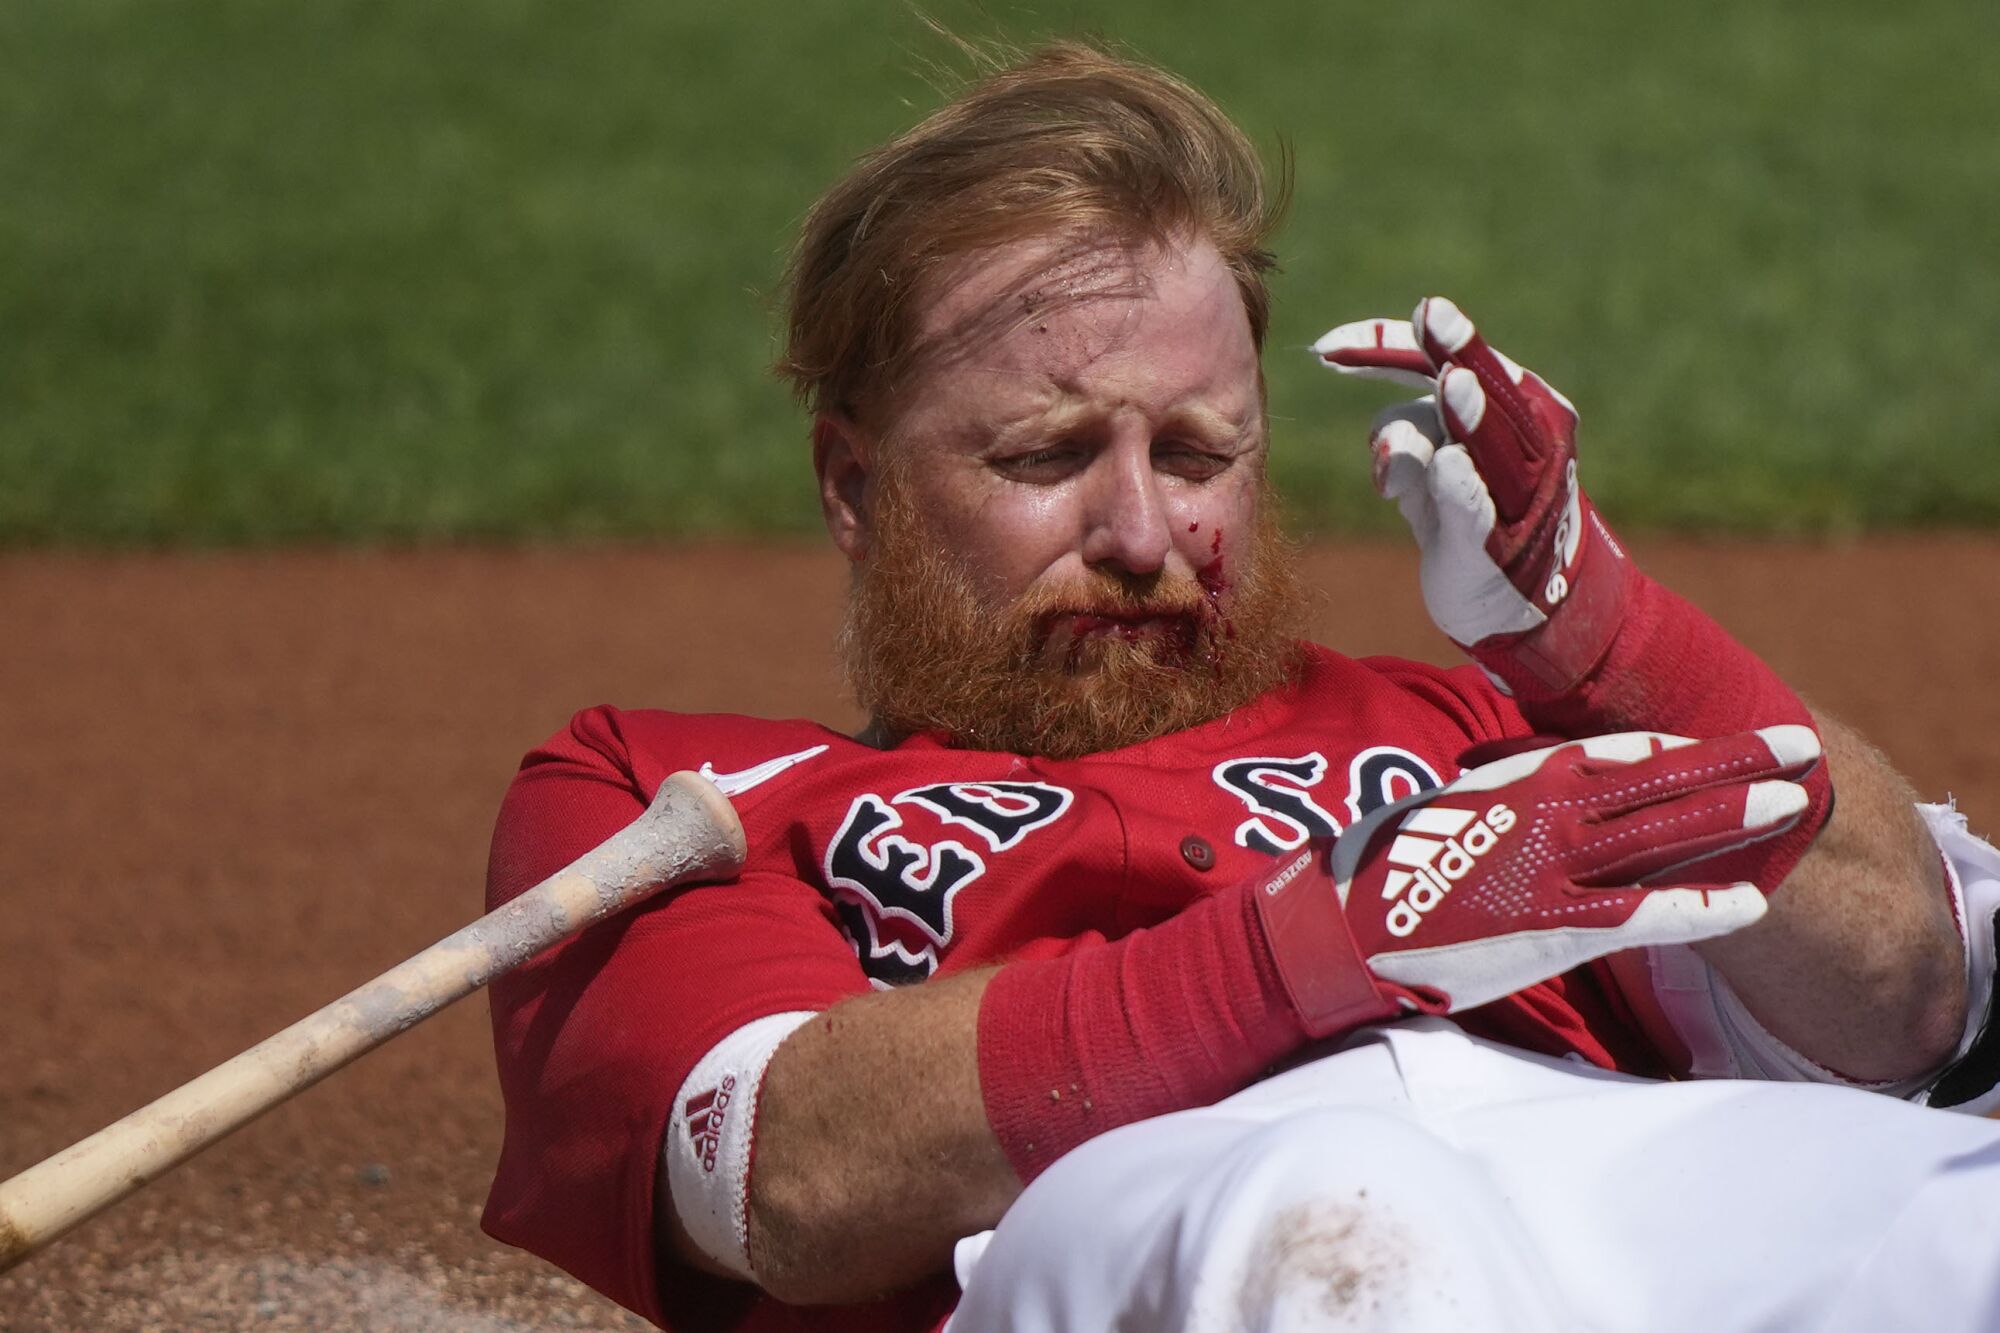 Justin Turner reacts after being hit in the face by a pitch by Tigers pitcher Matt Manning during spring training on March 6.